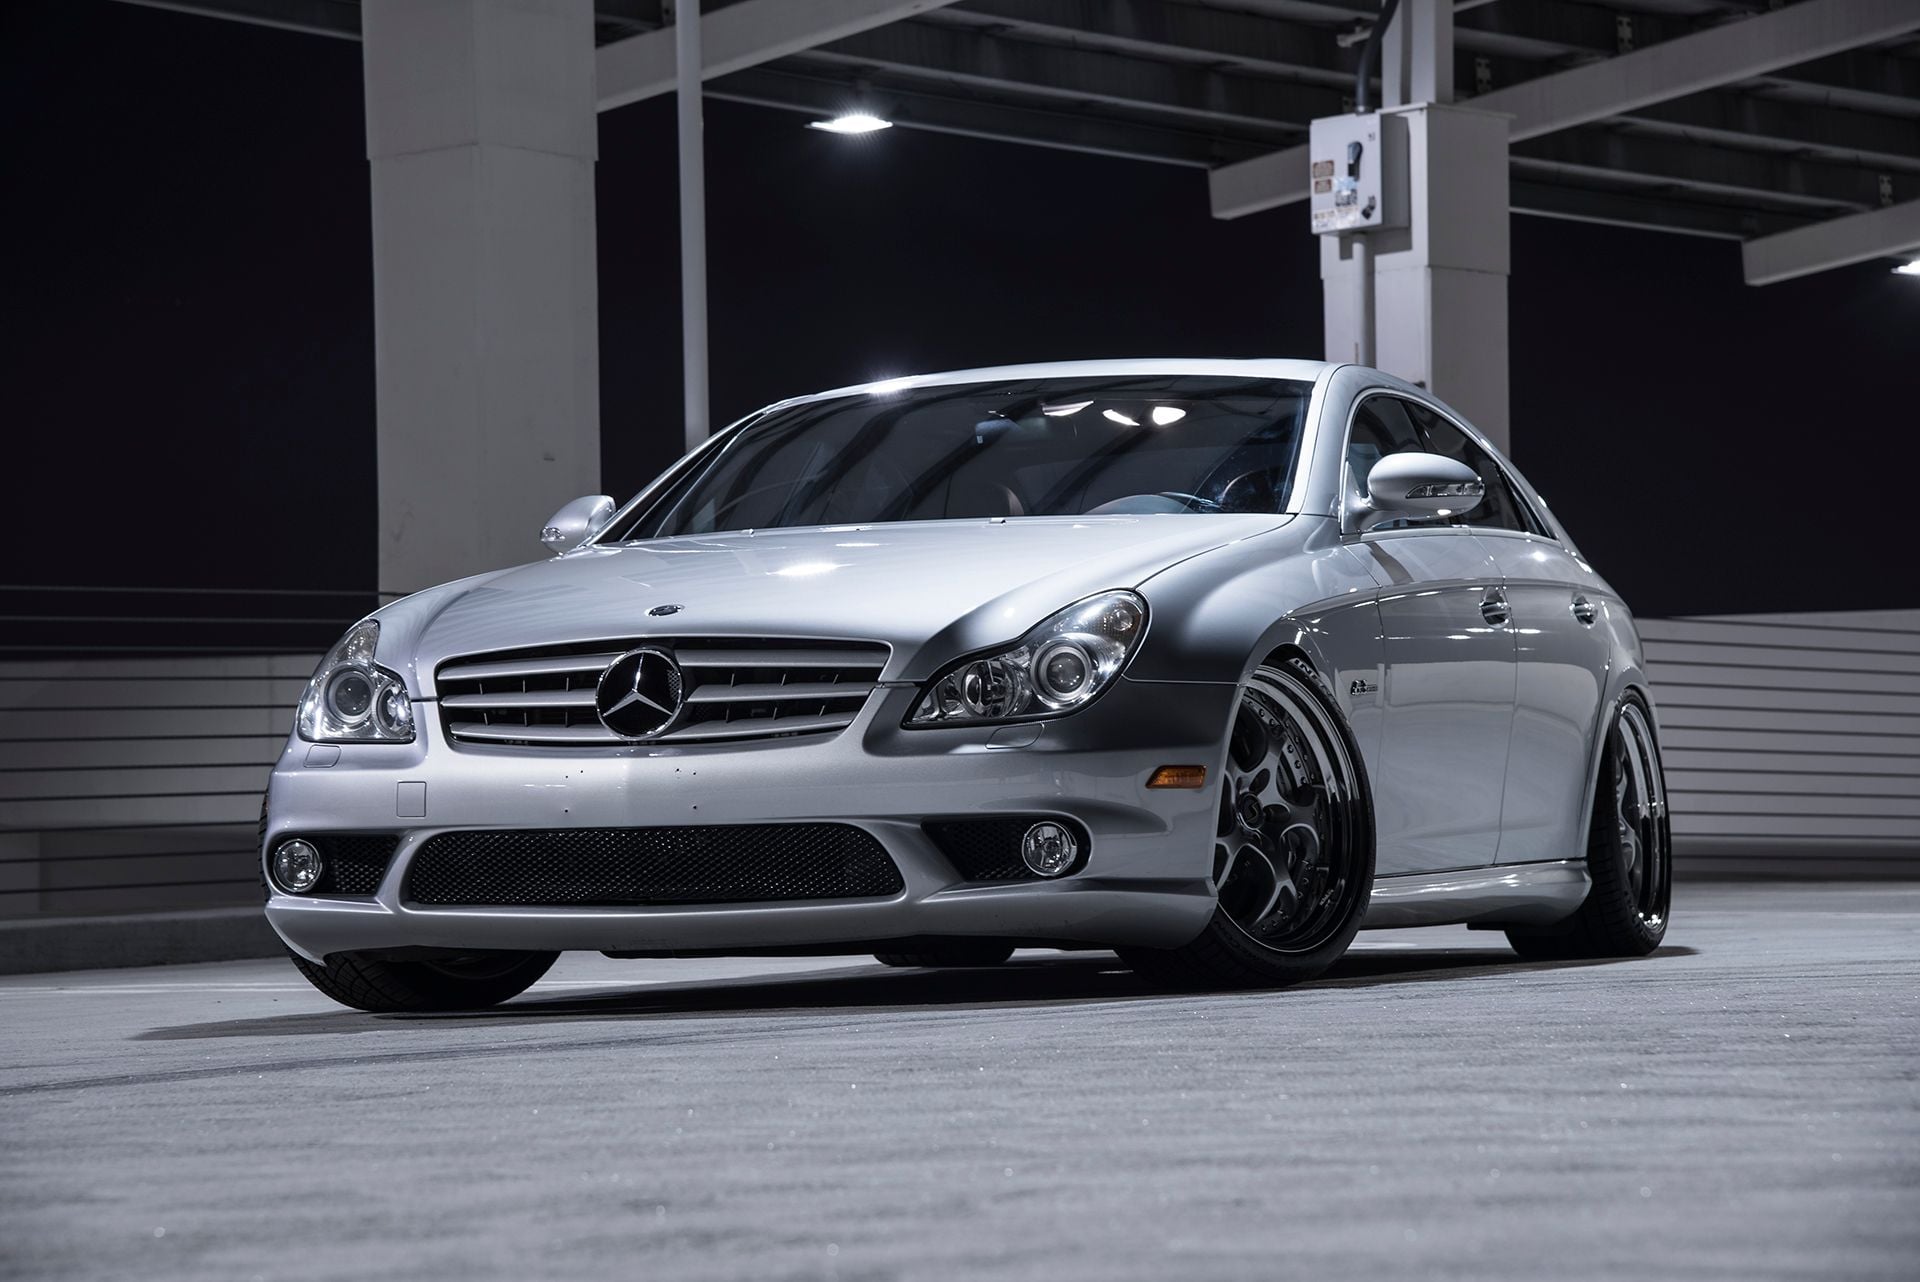 2008 Mercedes-Benz CLS63 AMG - 2008 CLS63 Factory P030 and Factory Carbon Fiber Interior $20K in Tasteful Mods - Used - VIN WDDDJ77X18A125112 - 57,000 Miles - 8 cyl - 2WD - Automatic - Sedan - Silver - Irvine, CA 92602, United States